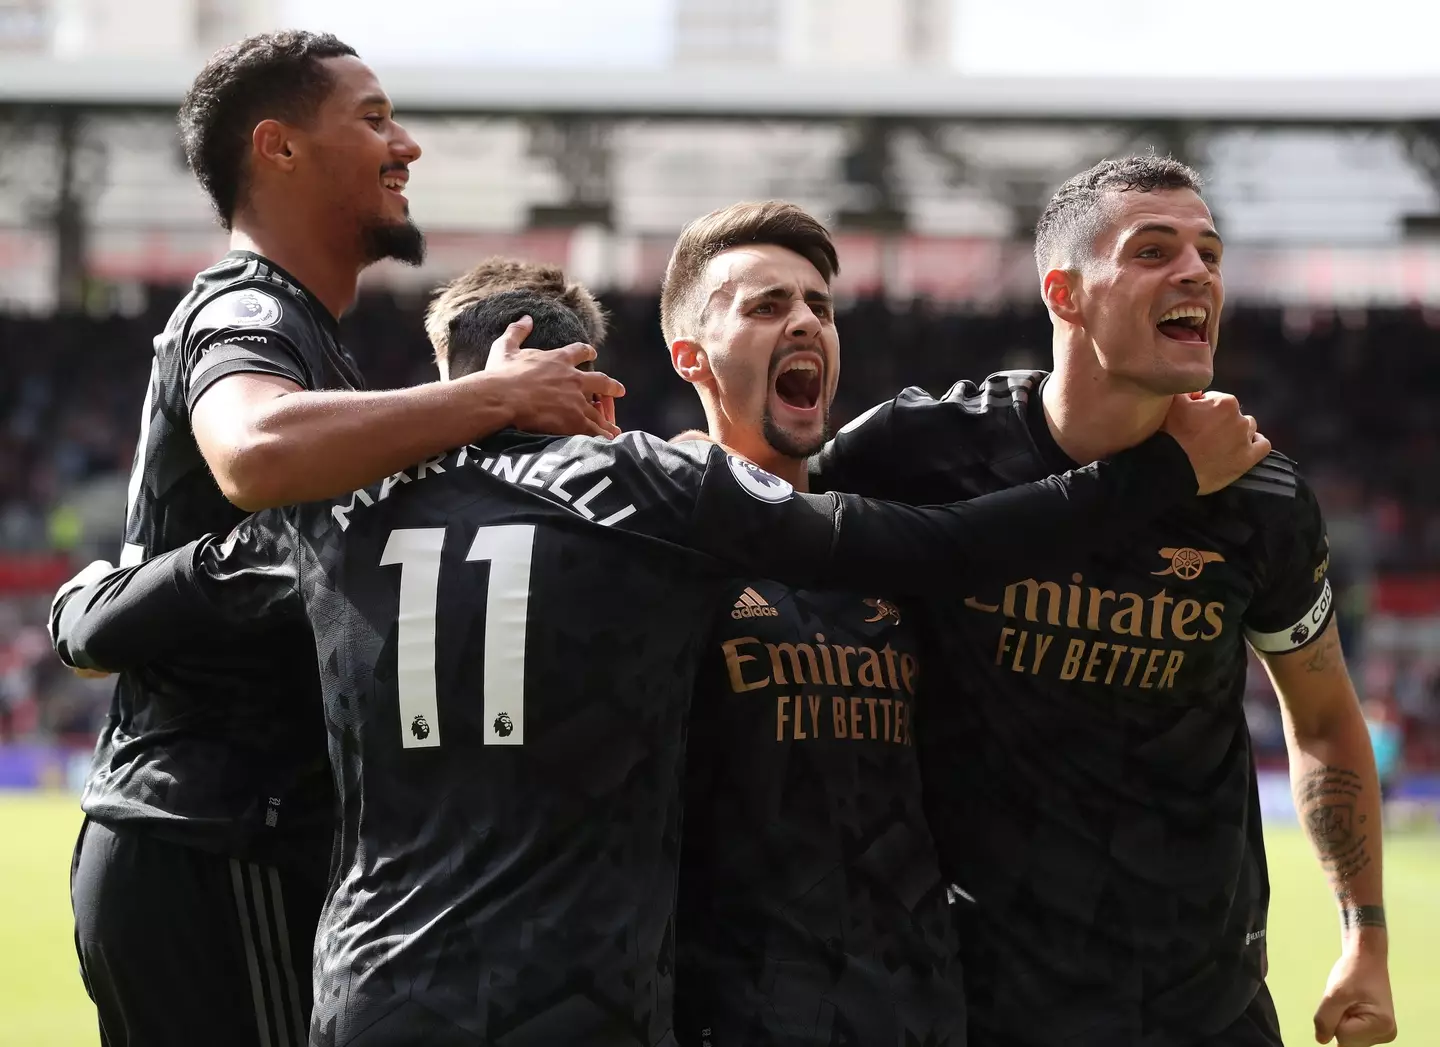 Arsenal have been in excellent form this season. Image: Alamy